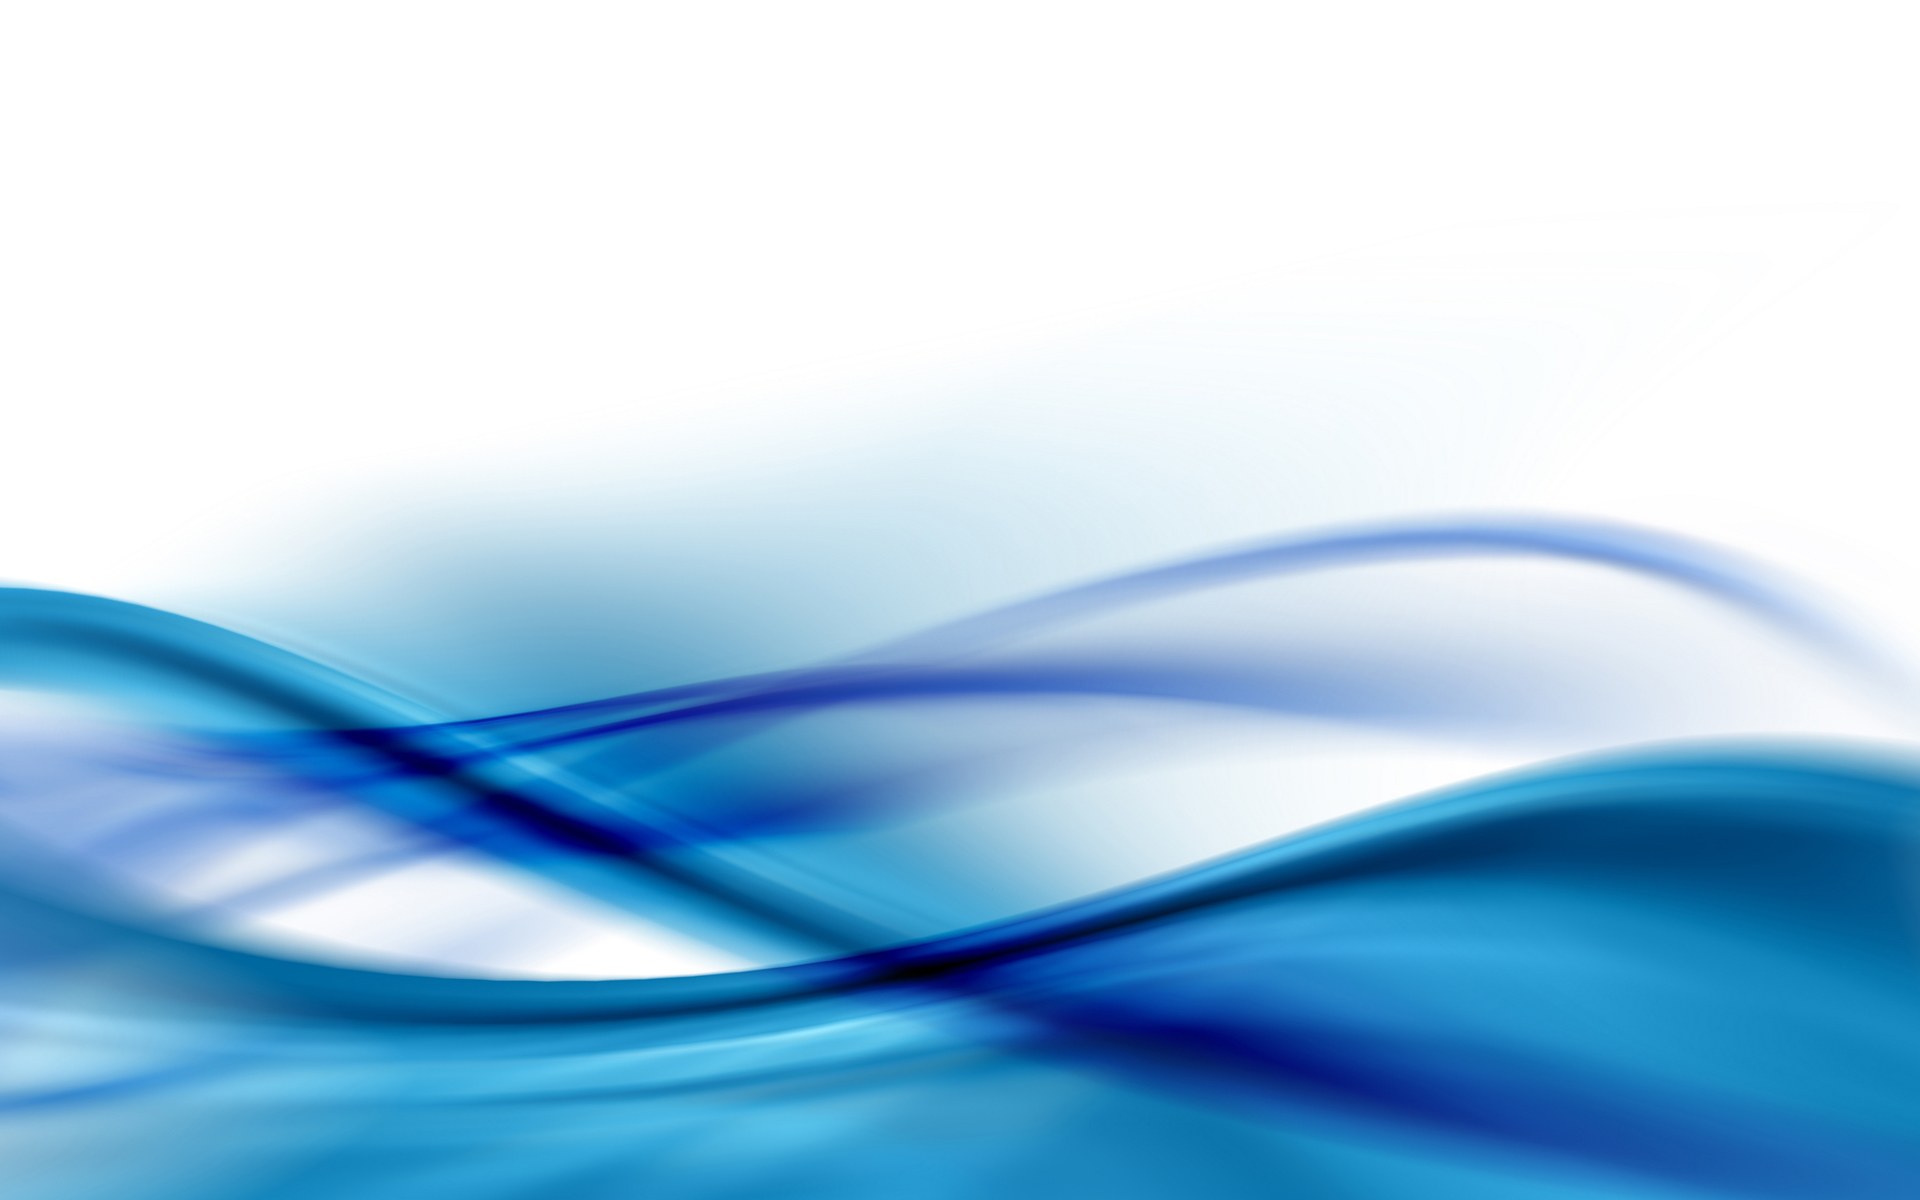 Abstract Blue 2164 Hd Wallpapers in Abstract   Imagescicom 1920x1200